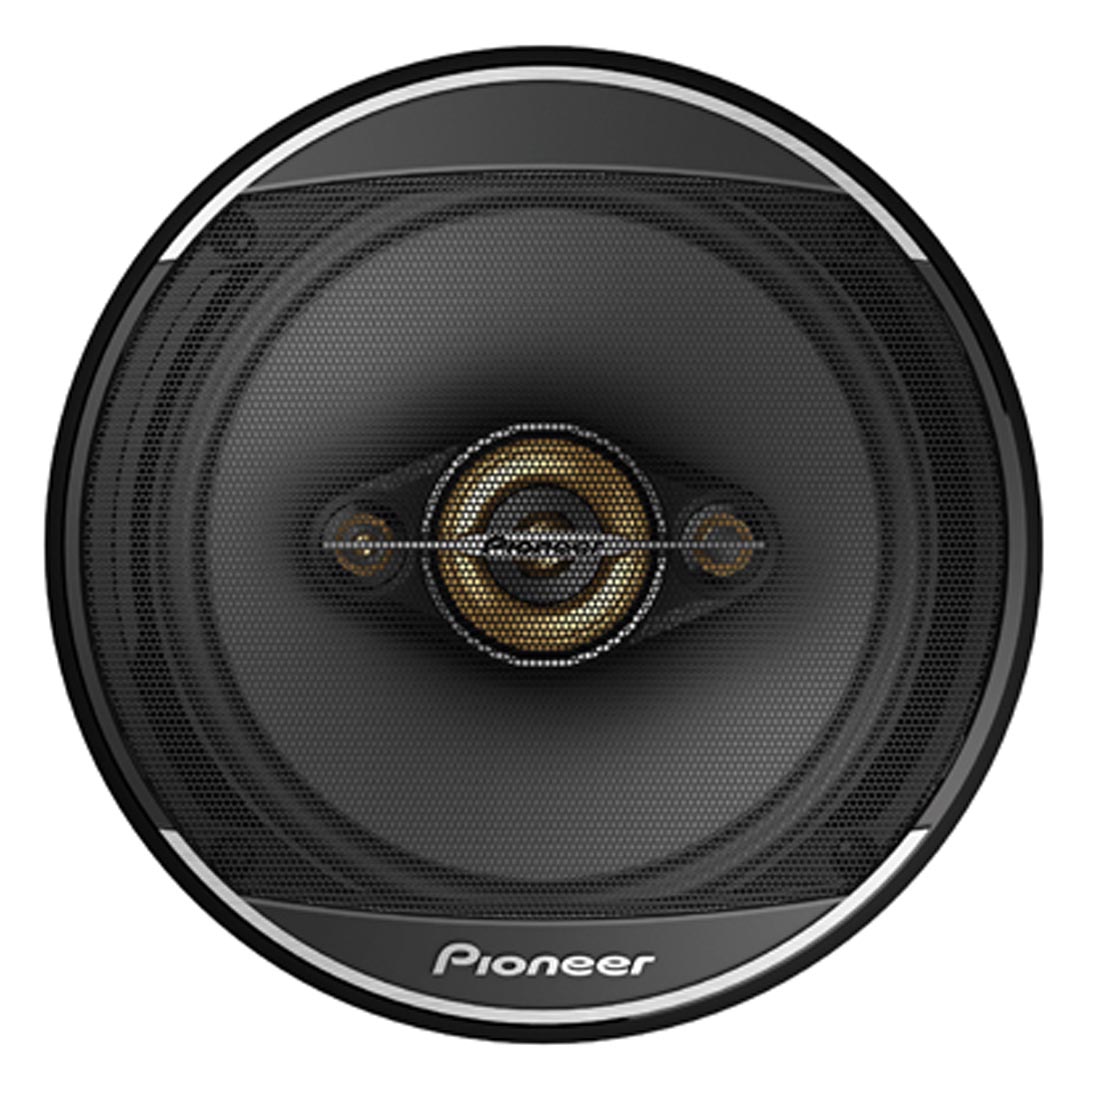 Pioneer TS-A1681F 6.5″ 4-Way Coaxial Car Speakers